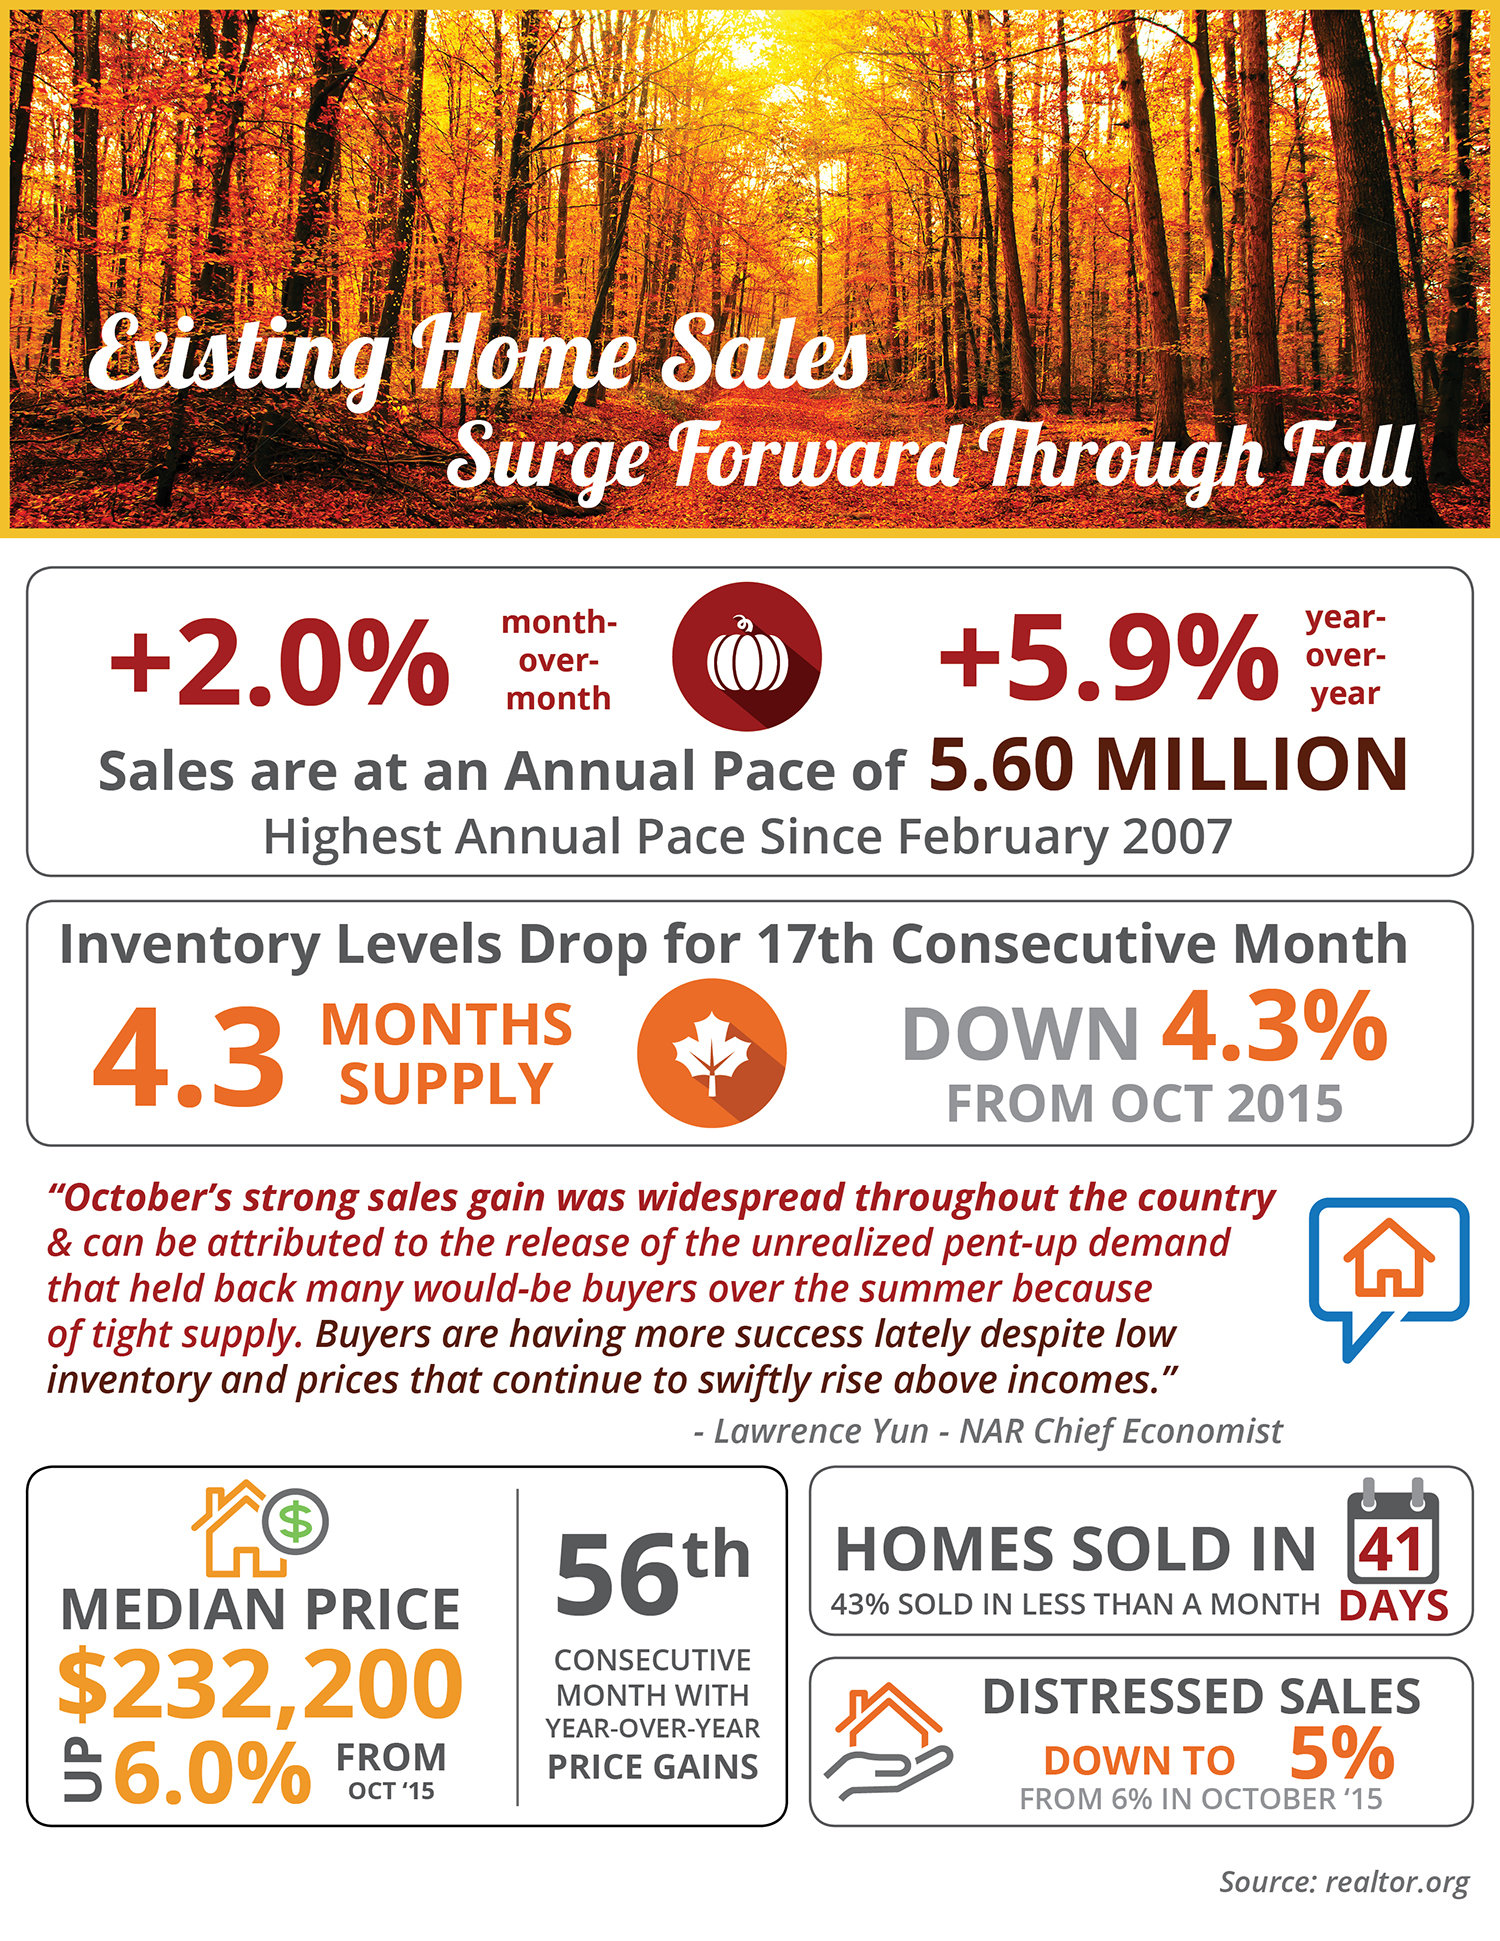 Existing Home Sales Surge Forward Through Fall [INFOGRAPHIC] | Simplifying The Market